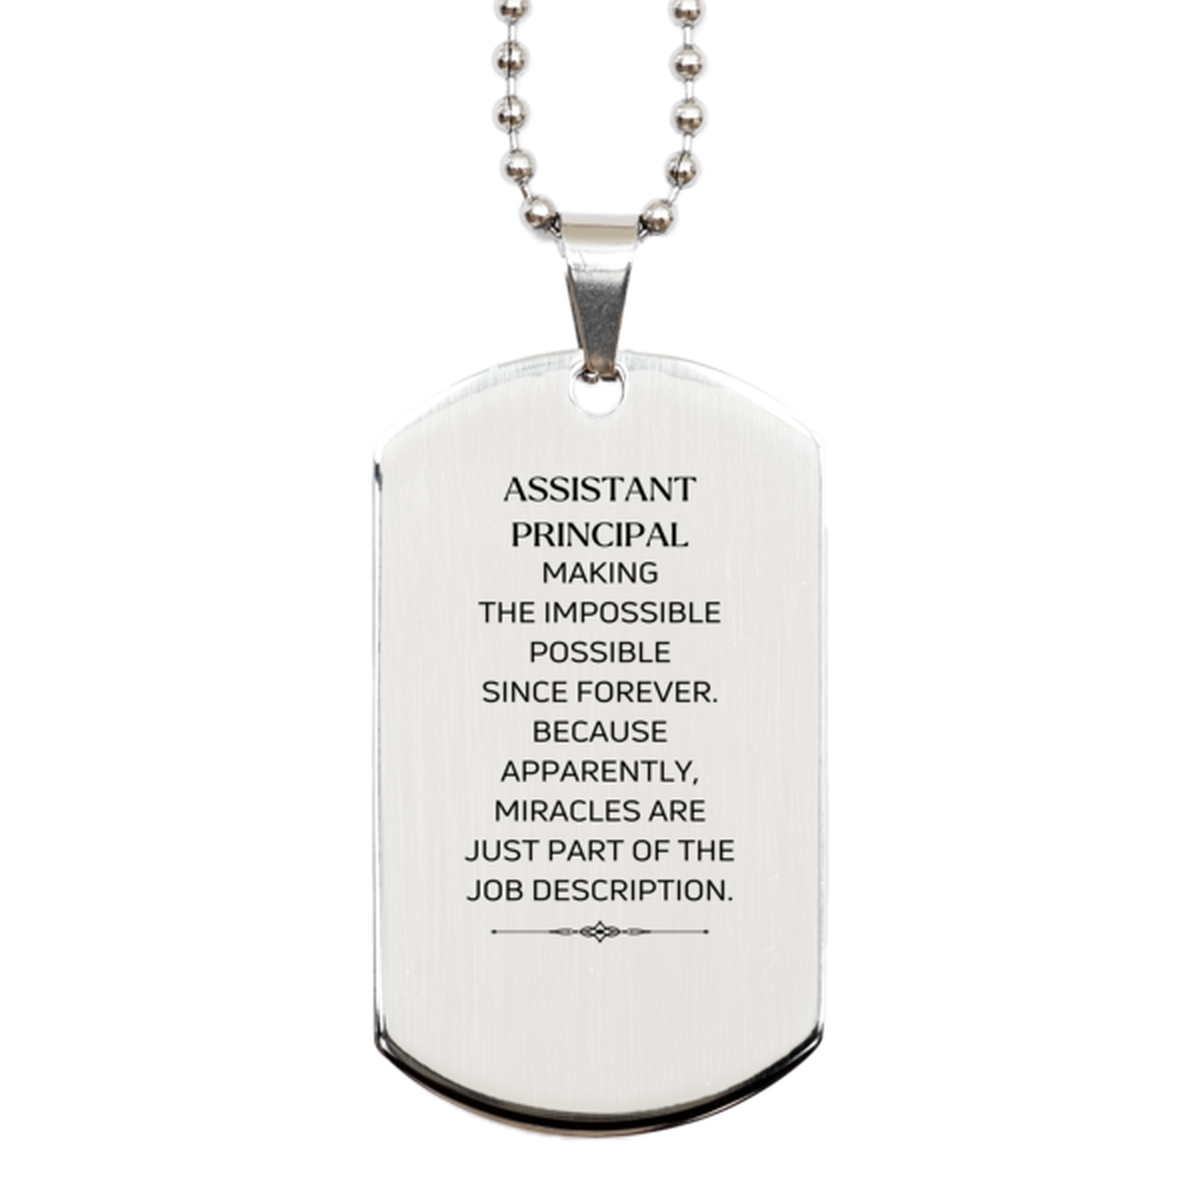 Funny Assistant Principal Gifts, Miracles are just part of the job description, Inspirational Birthday Silver Dog Tag For Assistant Principal, Men, Women, Coworkers, Friends, Boss